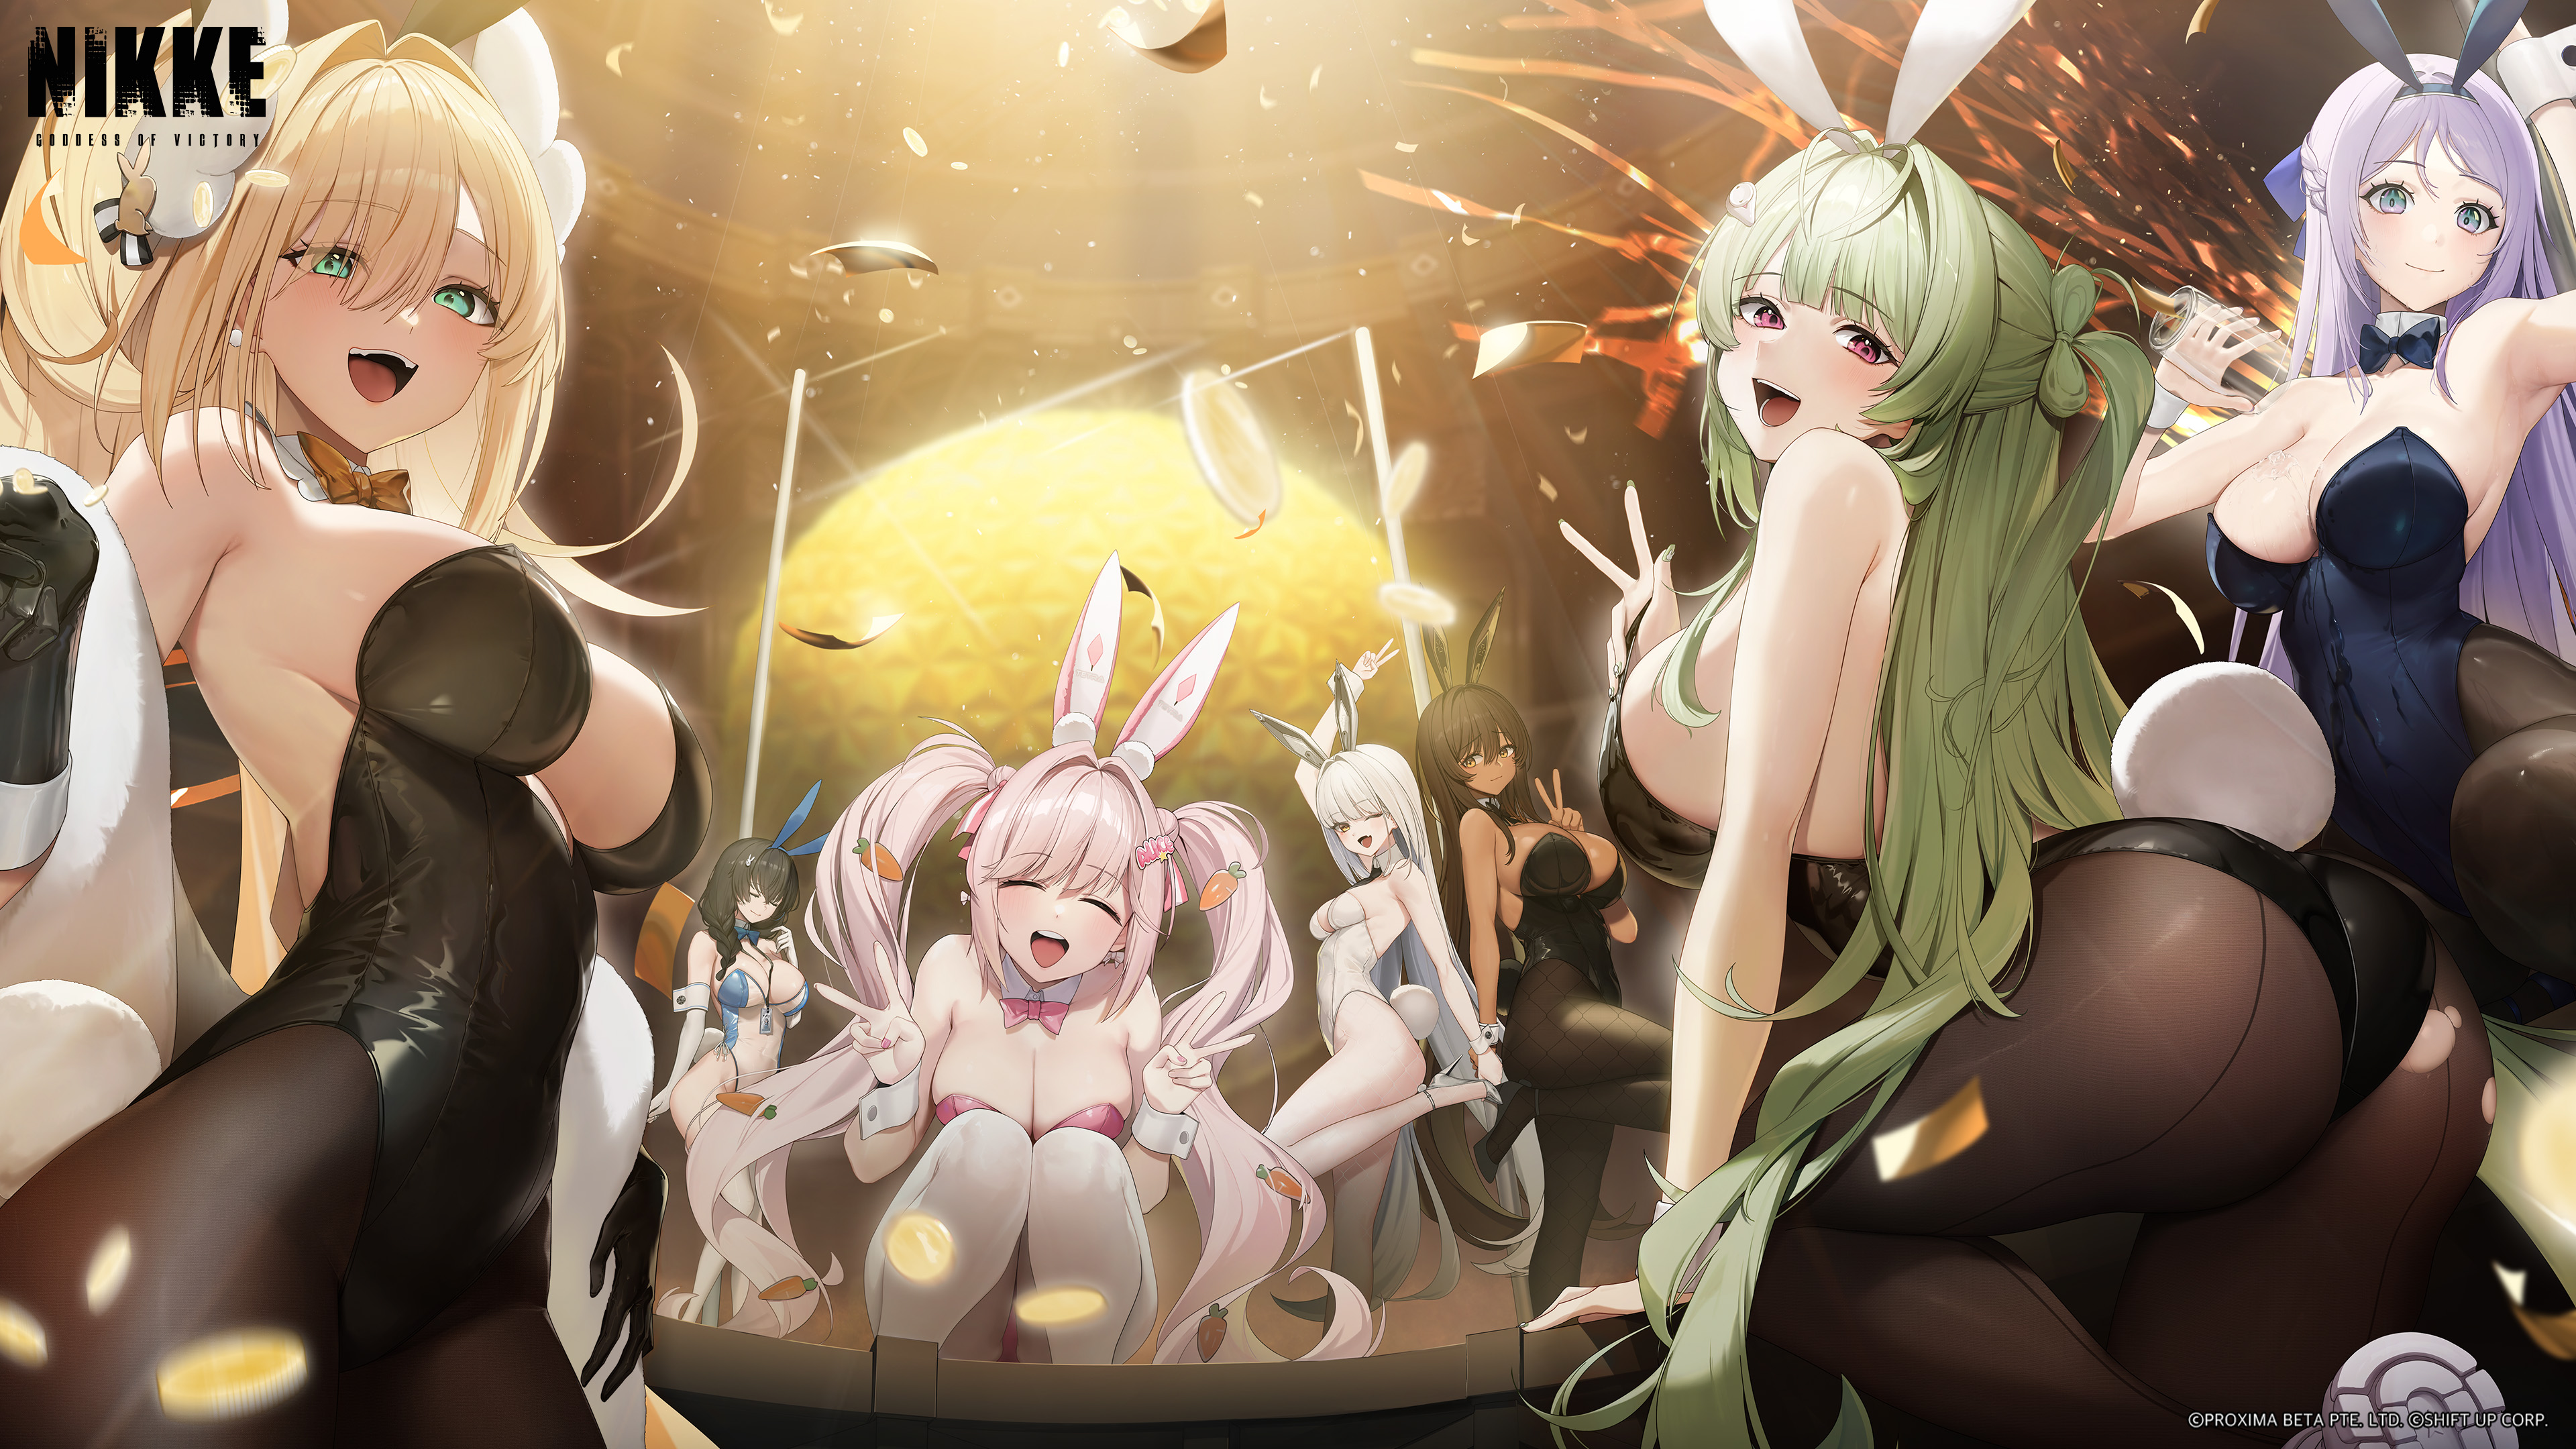 Anime 3840x2160 Nikke: The Goddess of Victory group of women leotard bunny suit bunny girl looking at viewer coins Alice (Nikke) peace sign Folkwang (Nikke) bow tie Mary (Nikke) Noir (Nikke) Rupee (Nikke: The Goddess of Victory) Soda (Nikke: The Goddess Of Victory) bunny ears pantyhose strapless leotard ass big boobs headdress women indoors back gold coins cleavage long hair twintails Blanc (Nikke)